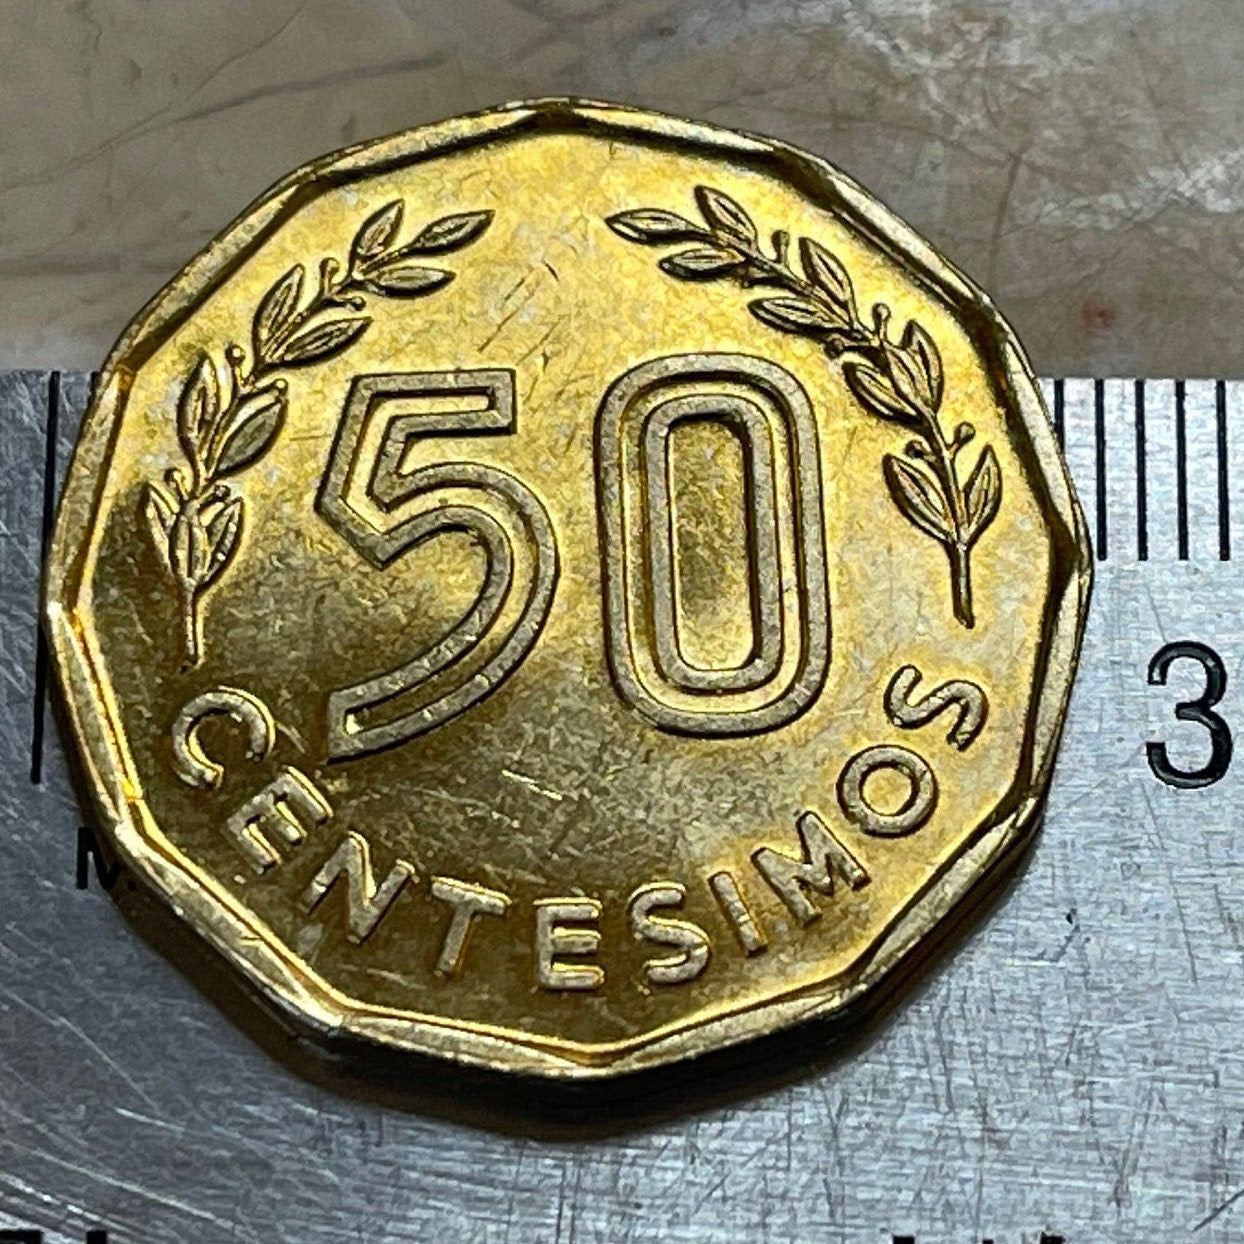 Scales of Justice 50 Centesimos Uruguay Authentic Coin Money for Jewelry and Craft Making (Libra)